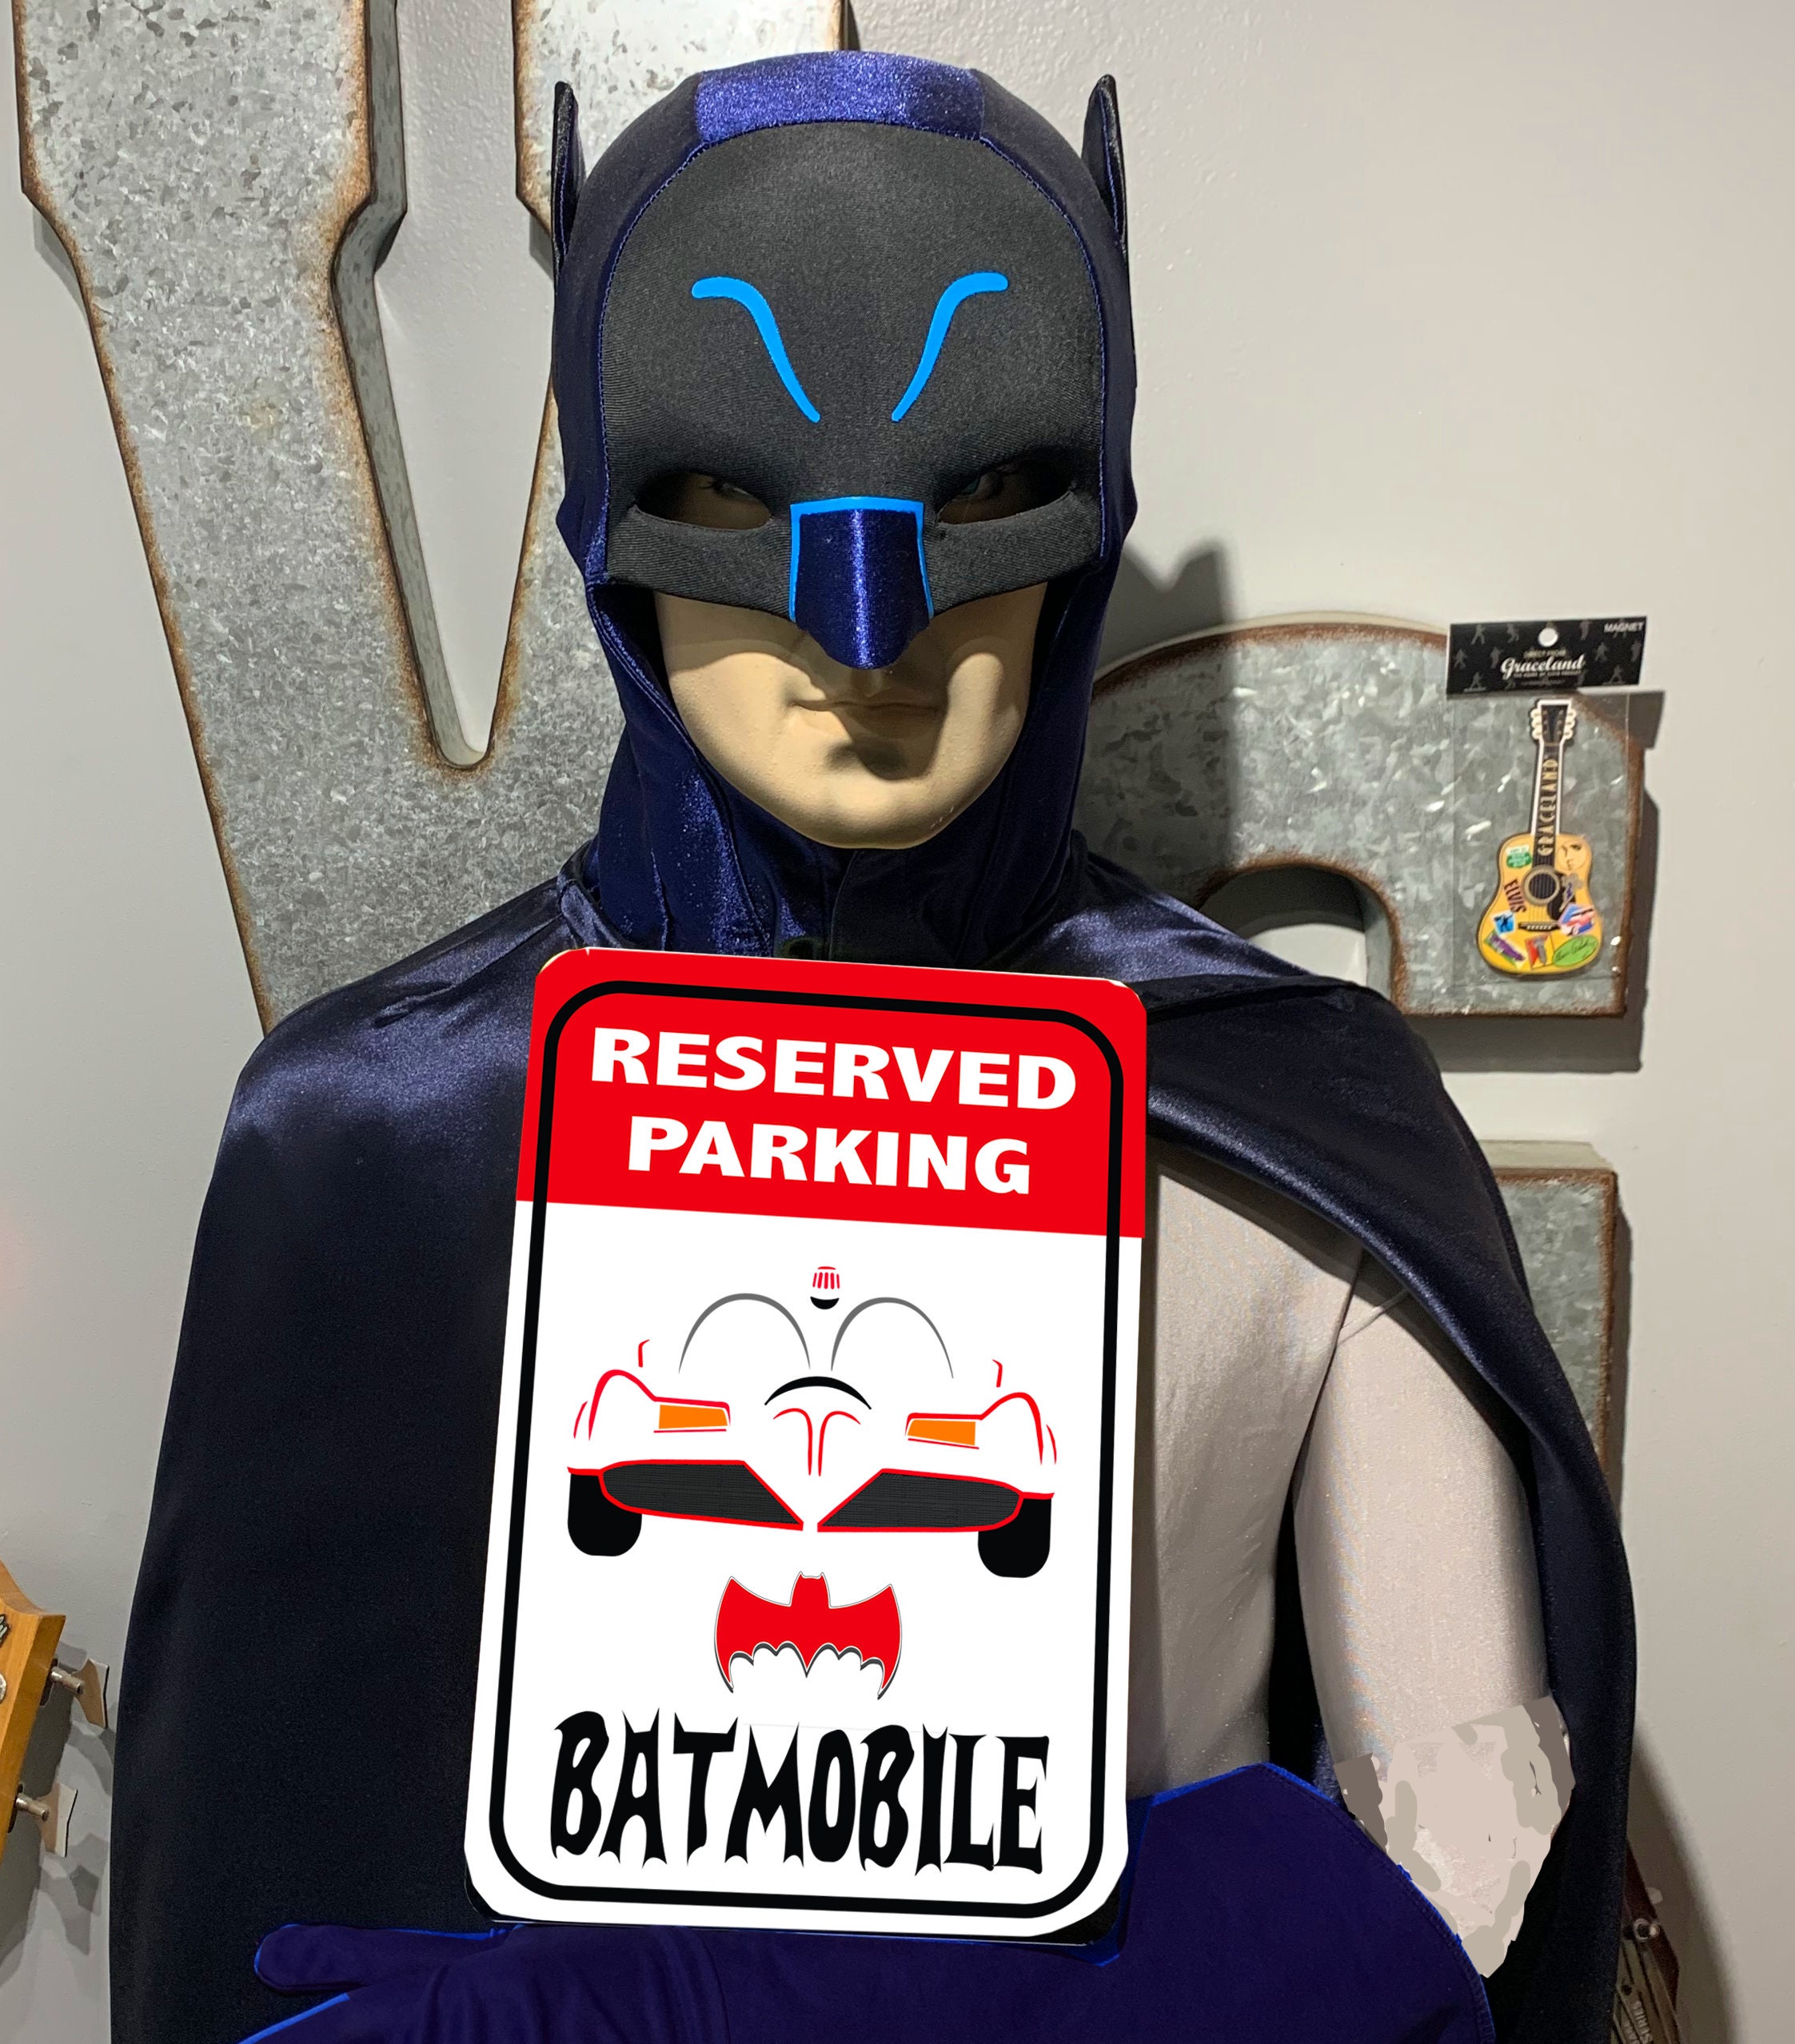 Batmobile Parking Signdont Let Someone Take The Caped Etsy